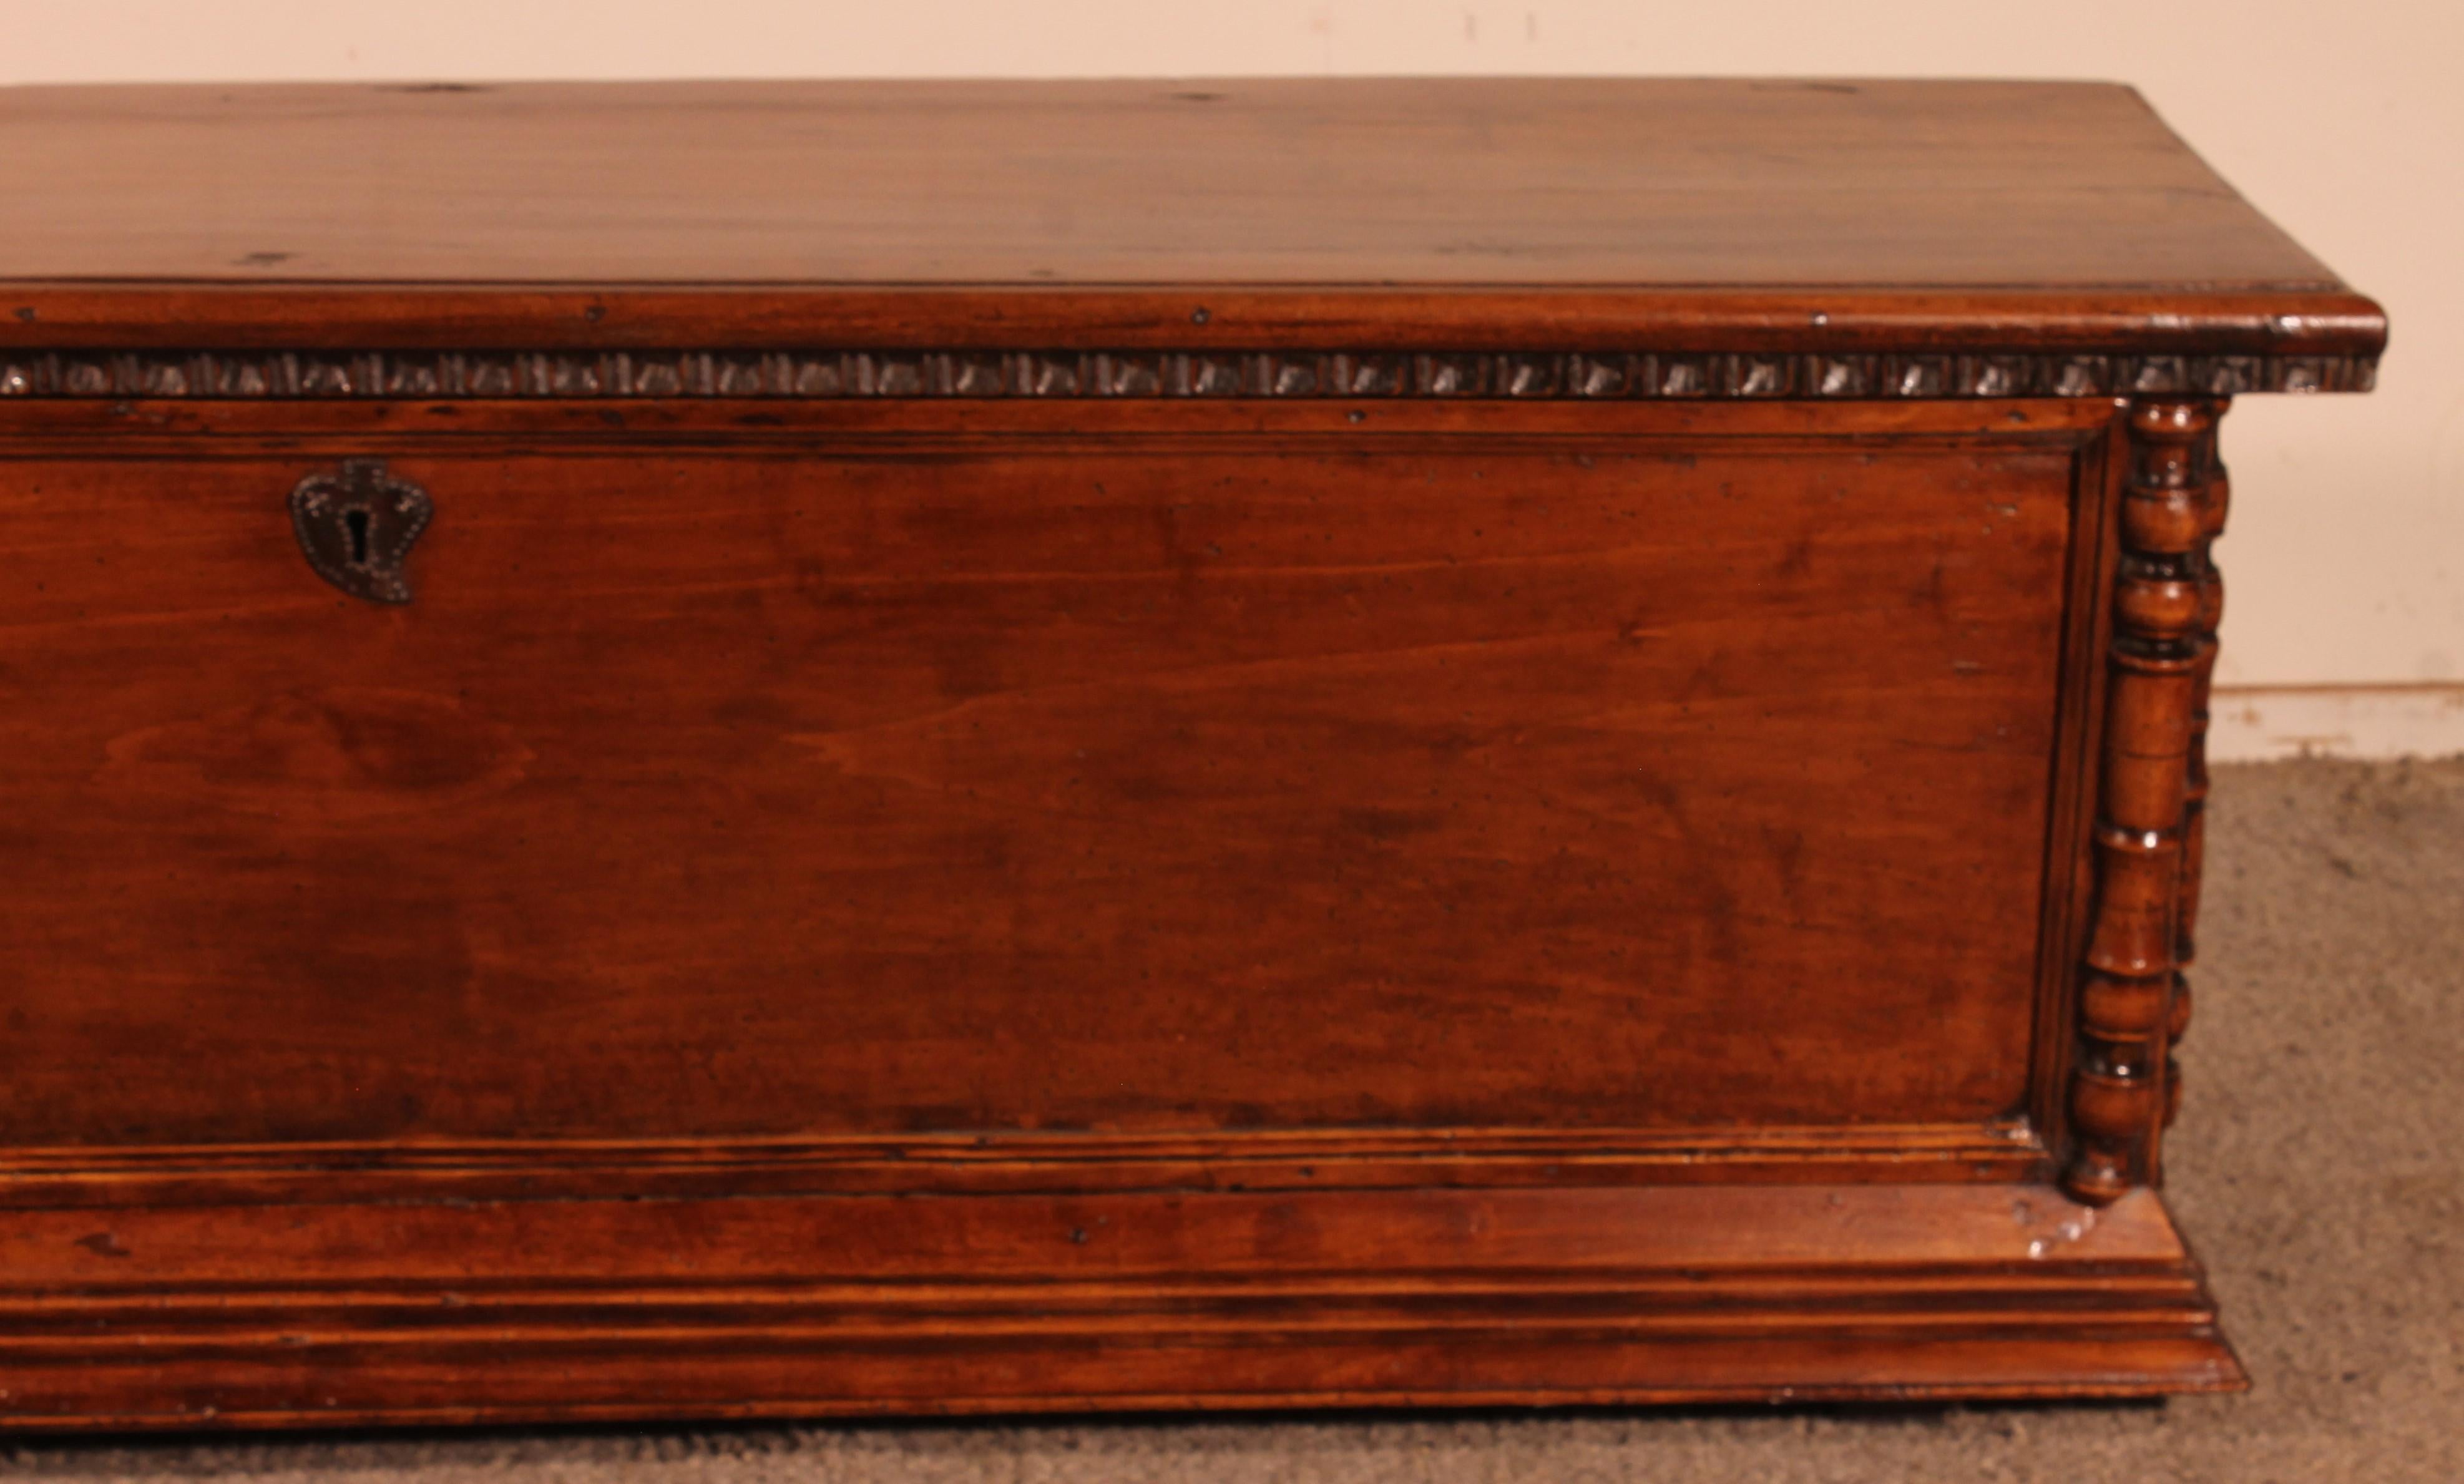 Superb chest called cassone in walnut from the 16th century from the Italian Renaissance

Very beautiful large chest in walnut where each side is made up of a single board which is a sign of quality

Very beautiful top with a beautiful patina and a